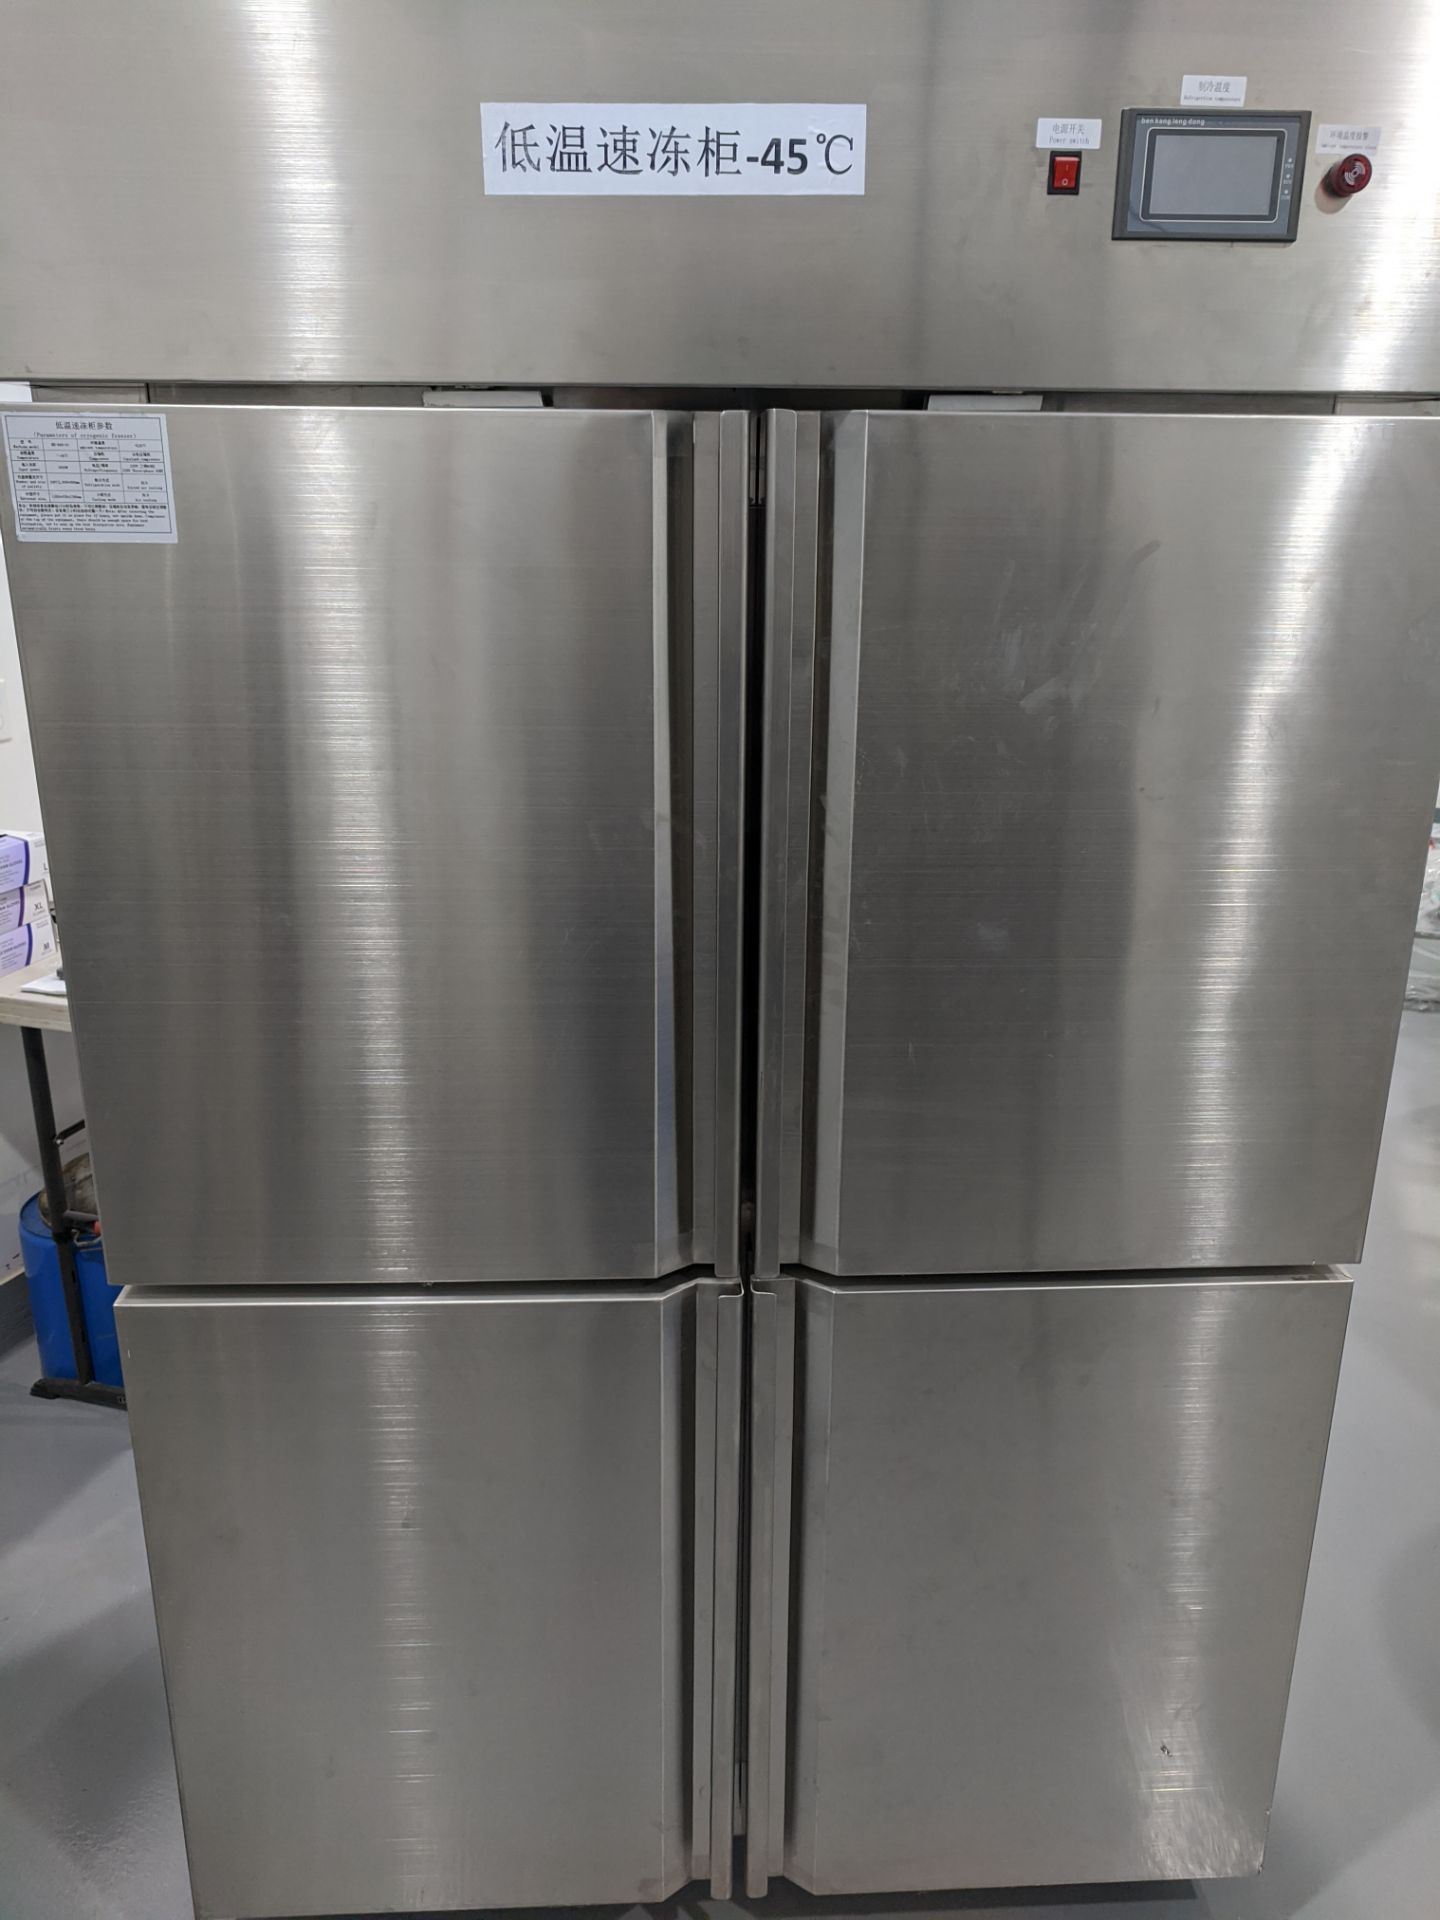 Lot of (3) Used CSCPOWER -45 Degrees C Cryogenic Freezers. All Model: HU-040-01 - Image 3 of 3